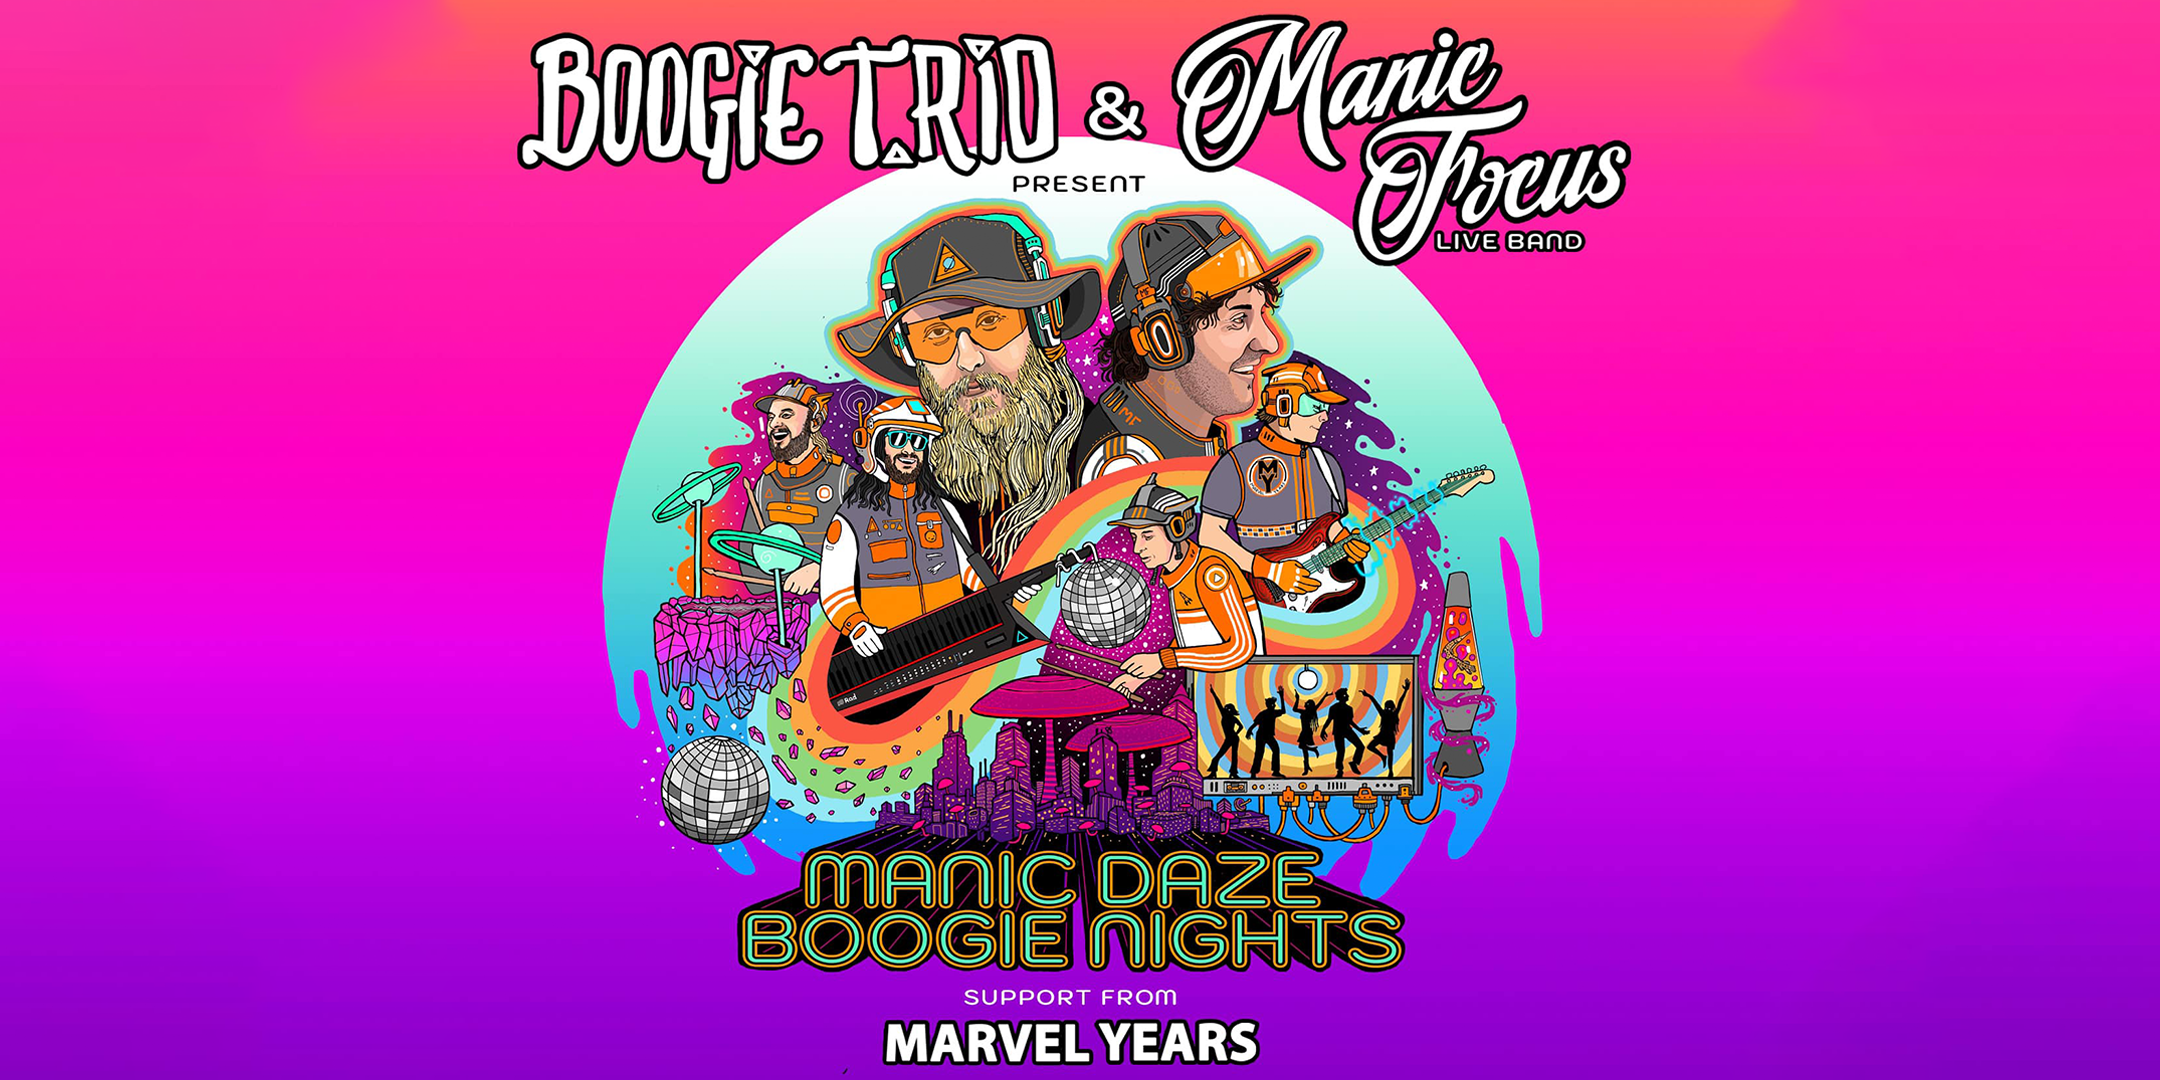 Manic Daze / Boogie Nights Tour at Deluxe – Old National Centre